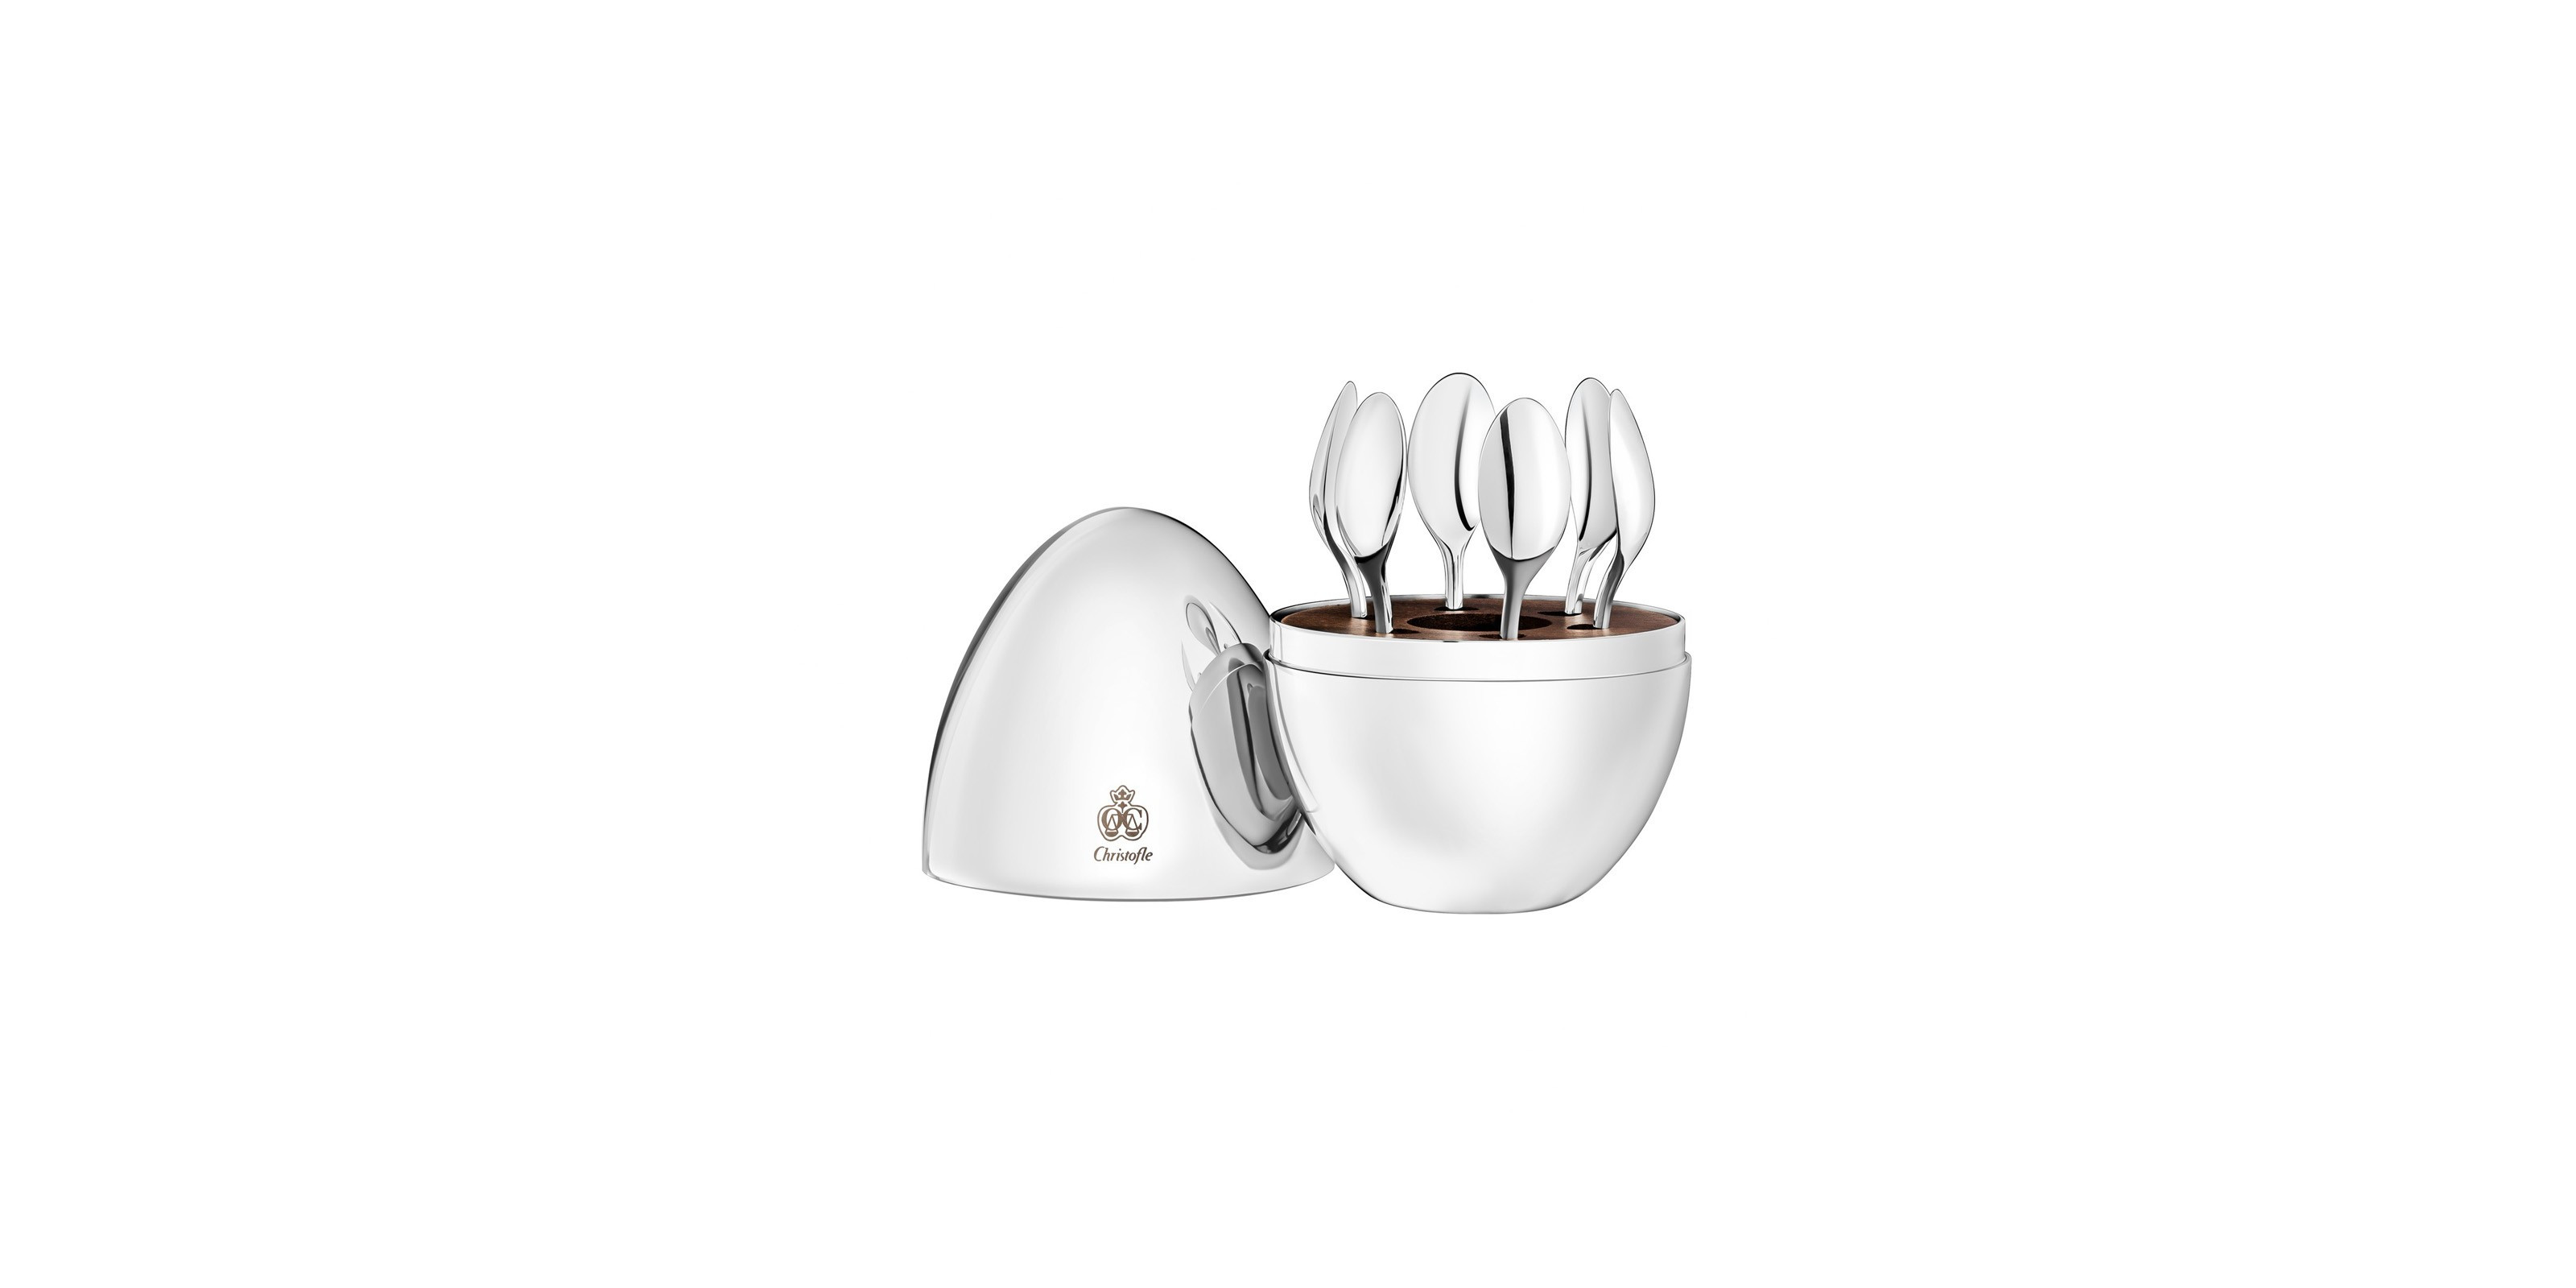 20 attractive Christofle Uni Vase 2024 free download christofle uni vase of 6 espresso spoons mood silver plated flatware set intended for diminuer le zoom